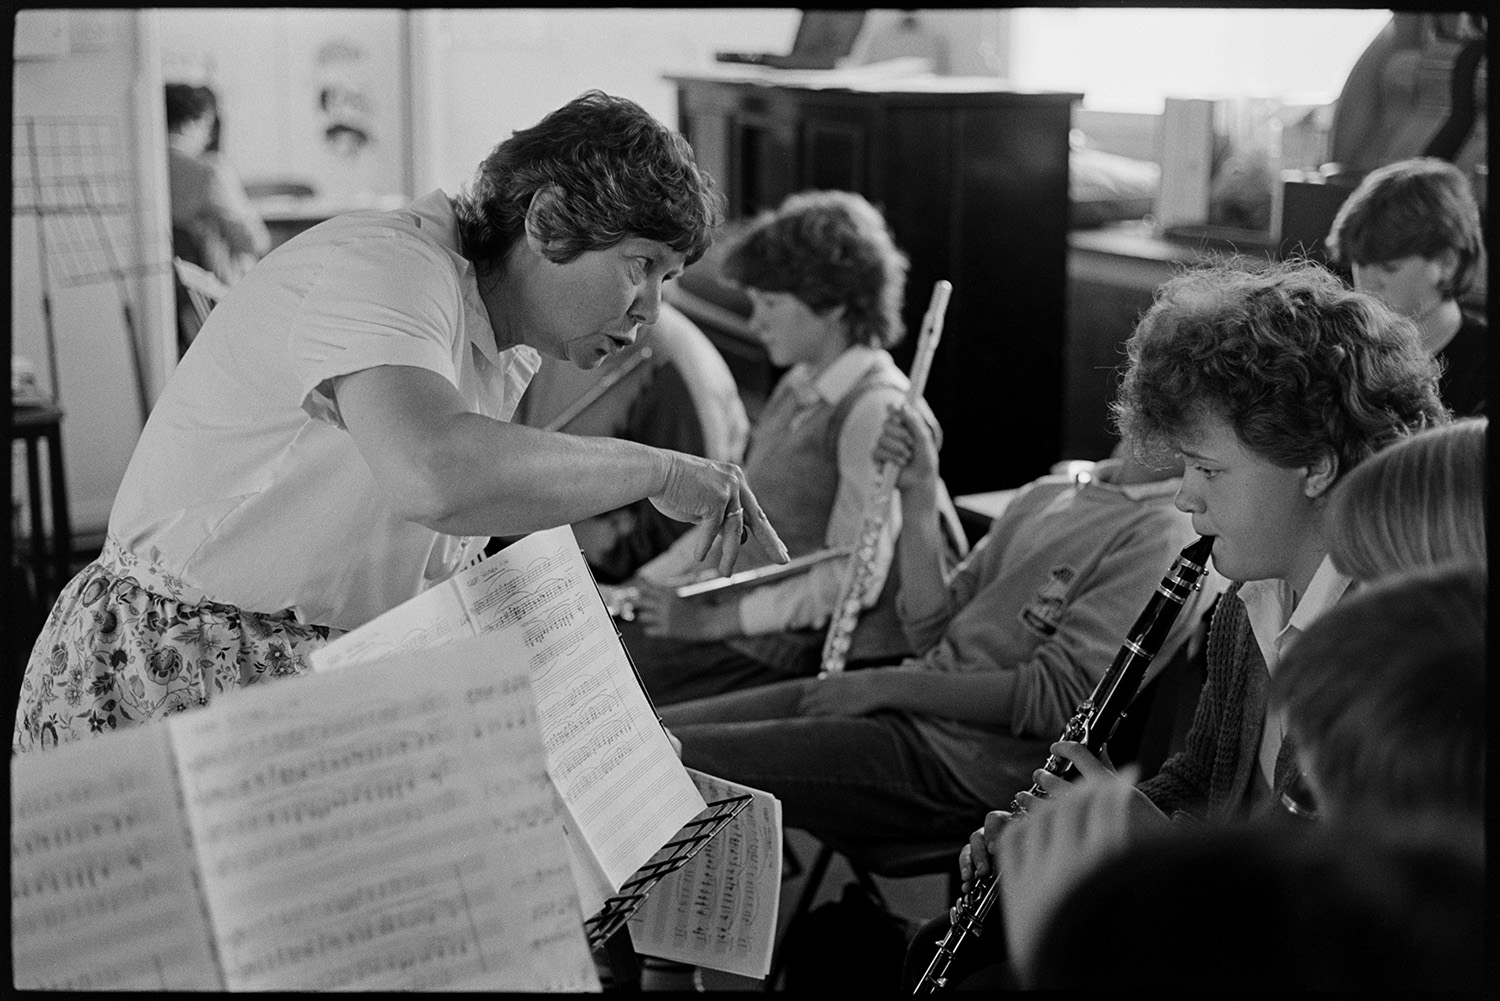 Music class in school, visiting teacher with staff and pupils playing music and advising. 
[A woman teaching a music lesson or orchestra in Holsworthy School. She is talking to a child playing the clarinet. Pupils with flutes can be seen in the background.]